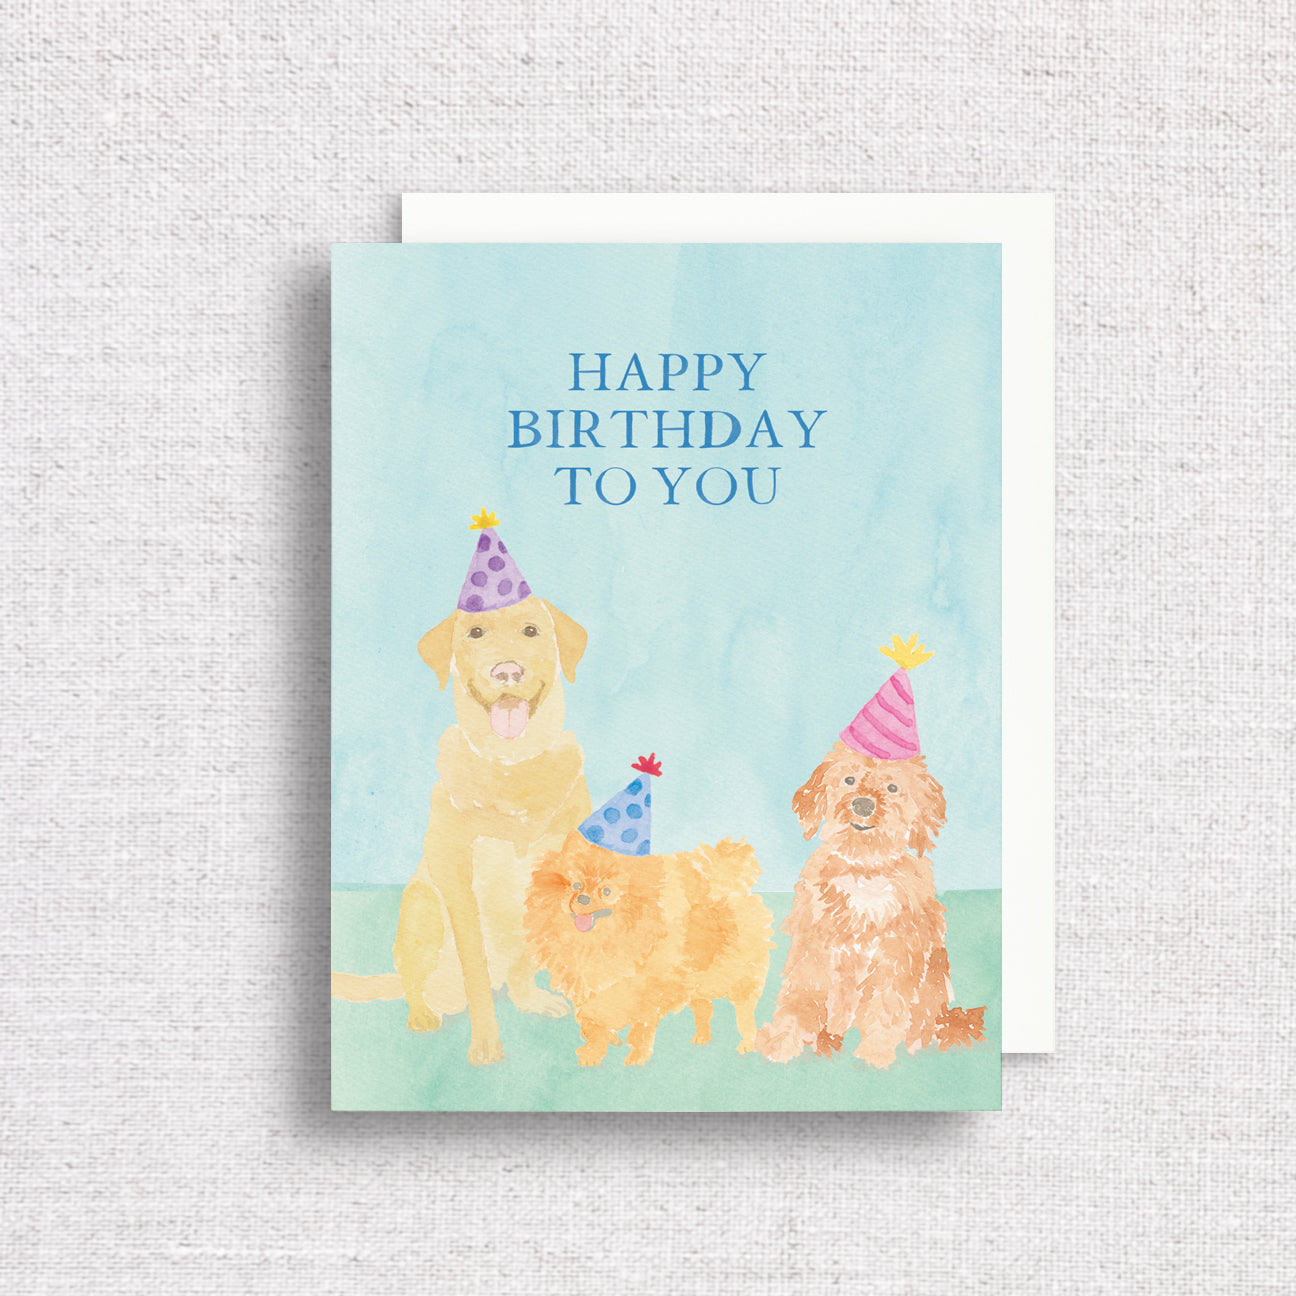 Cute Dogs Birthday Greeting Card by Gert & Co